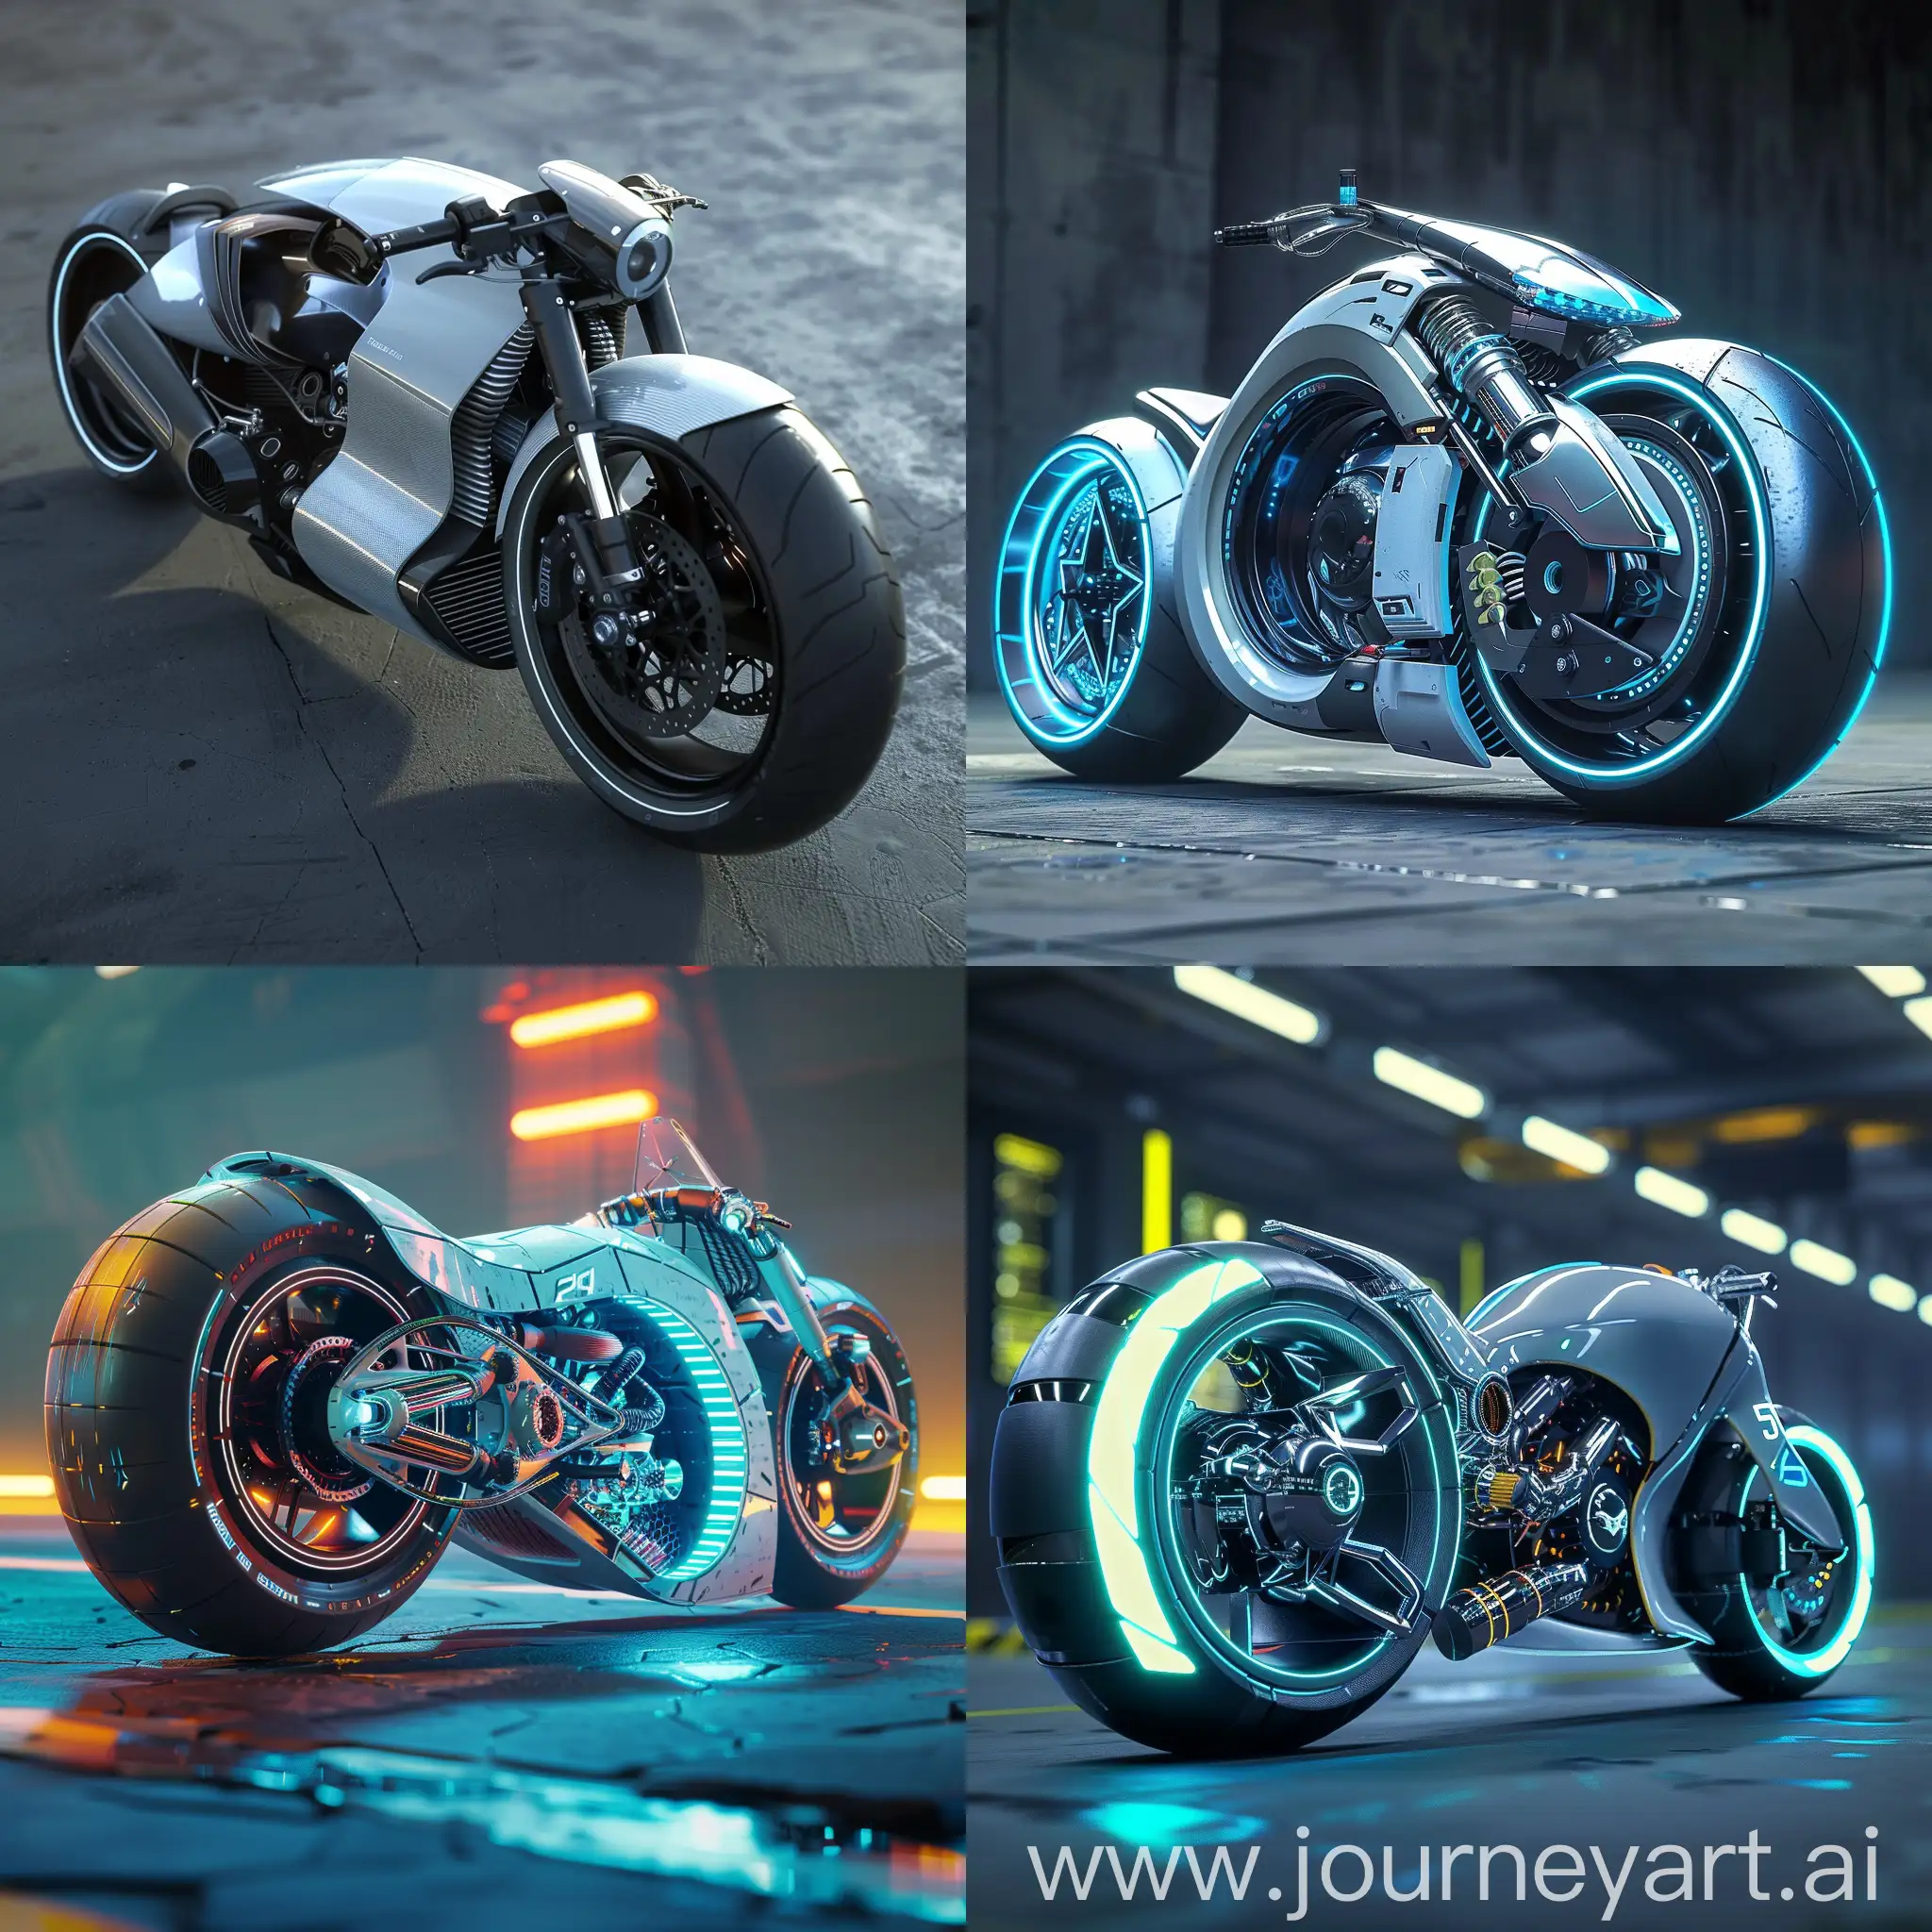 Futuristic-Motorcycle-with-Advanced-Electric-Powertrains-and-Integrated-AI-Systems